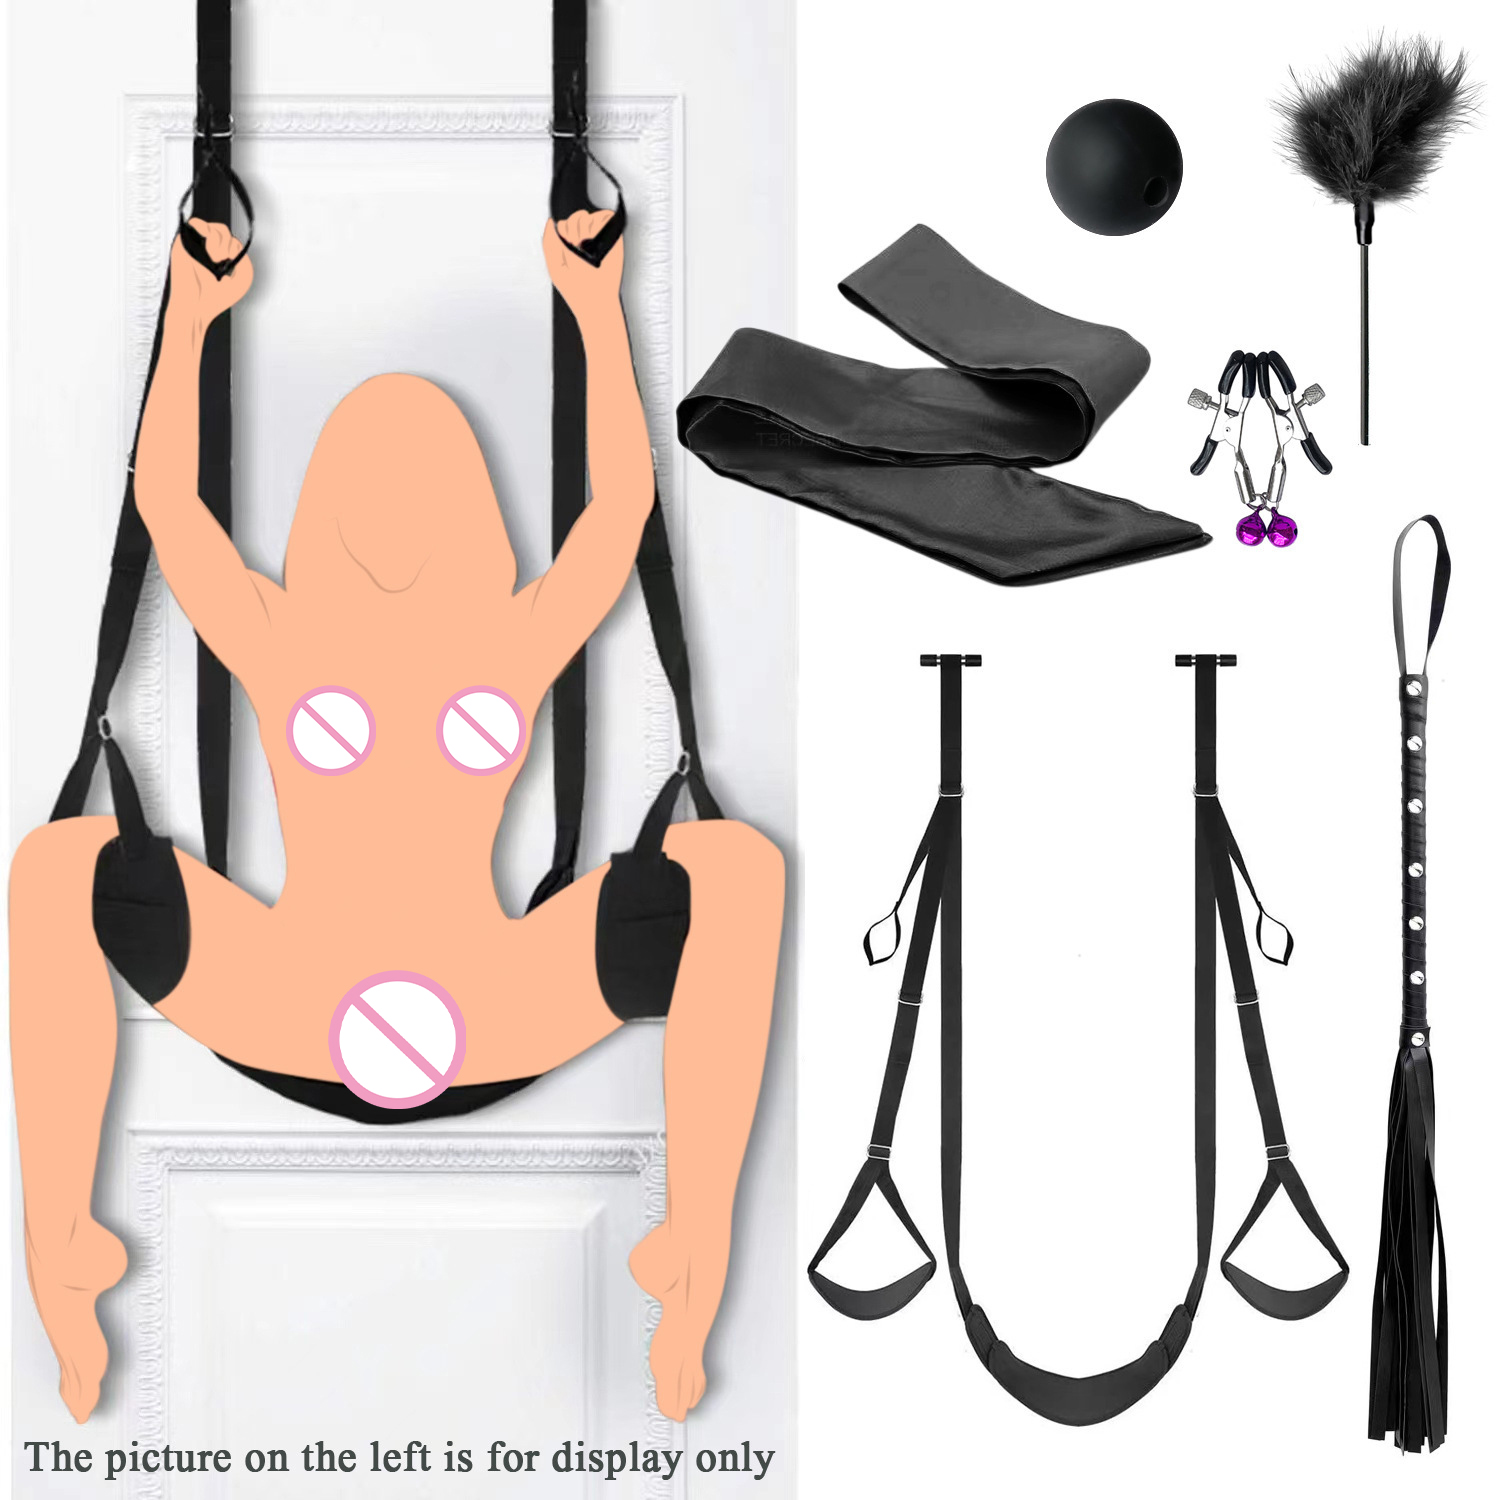 Sm Double Bondage Set Swing Style Thigh Restraint Sling Legs Binding Adult Sex Products Slave Fetish Toy Sex Swing For Women